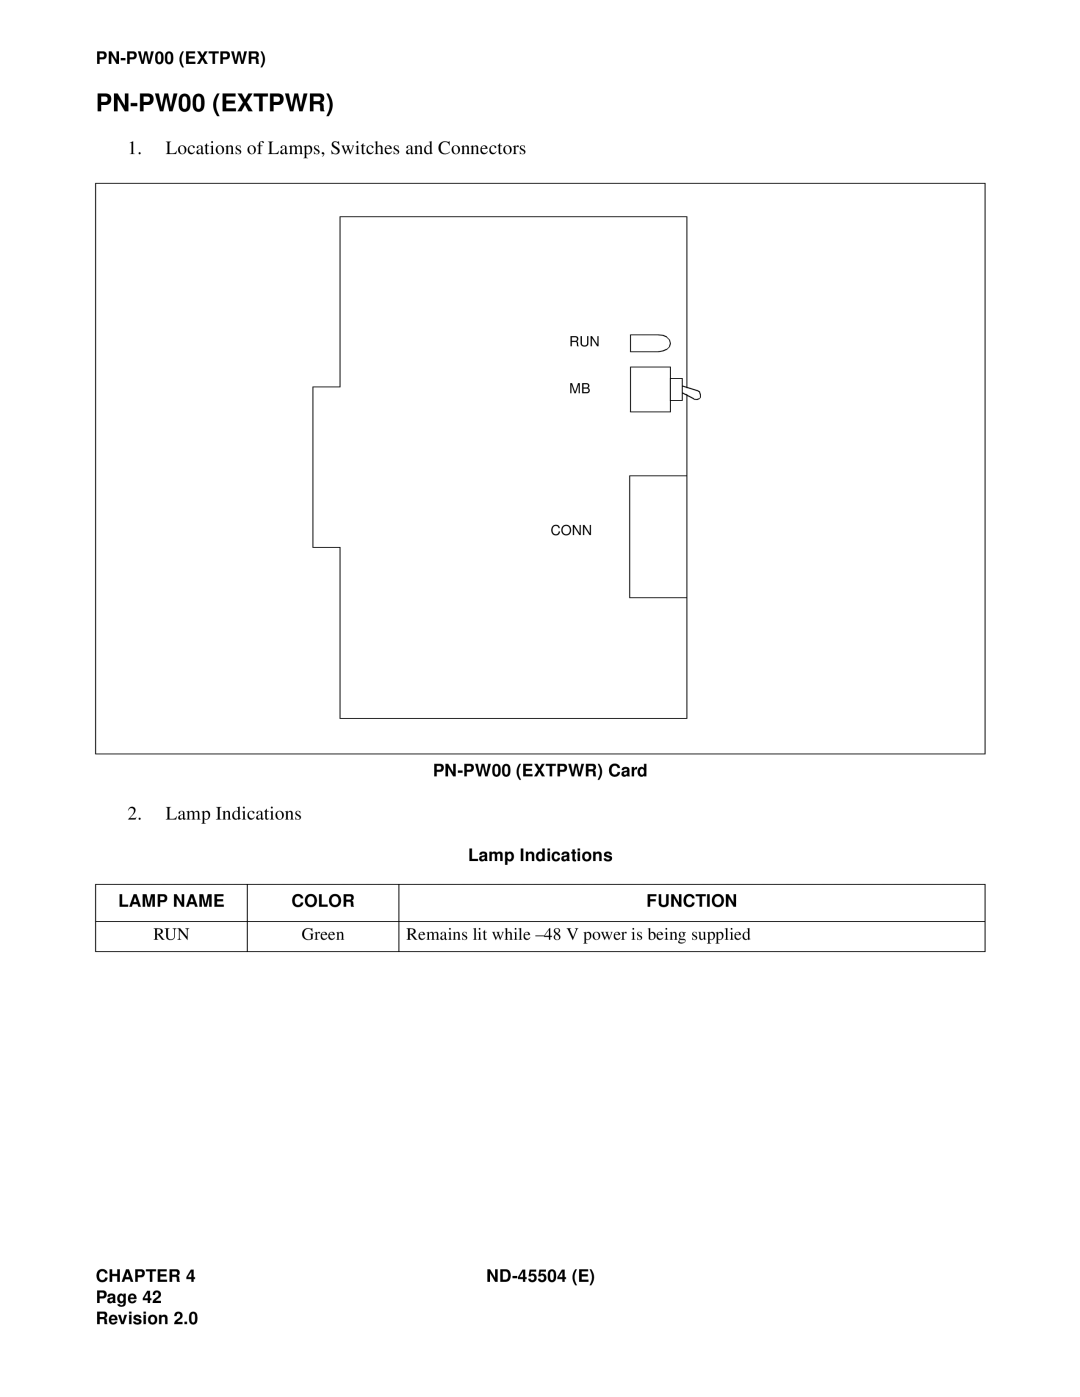 NEC 2000 IVS manual PN-PW00EXTPWR, Locations of Lamps, Switches and Connectors, Lamp Indications 